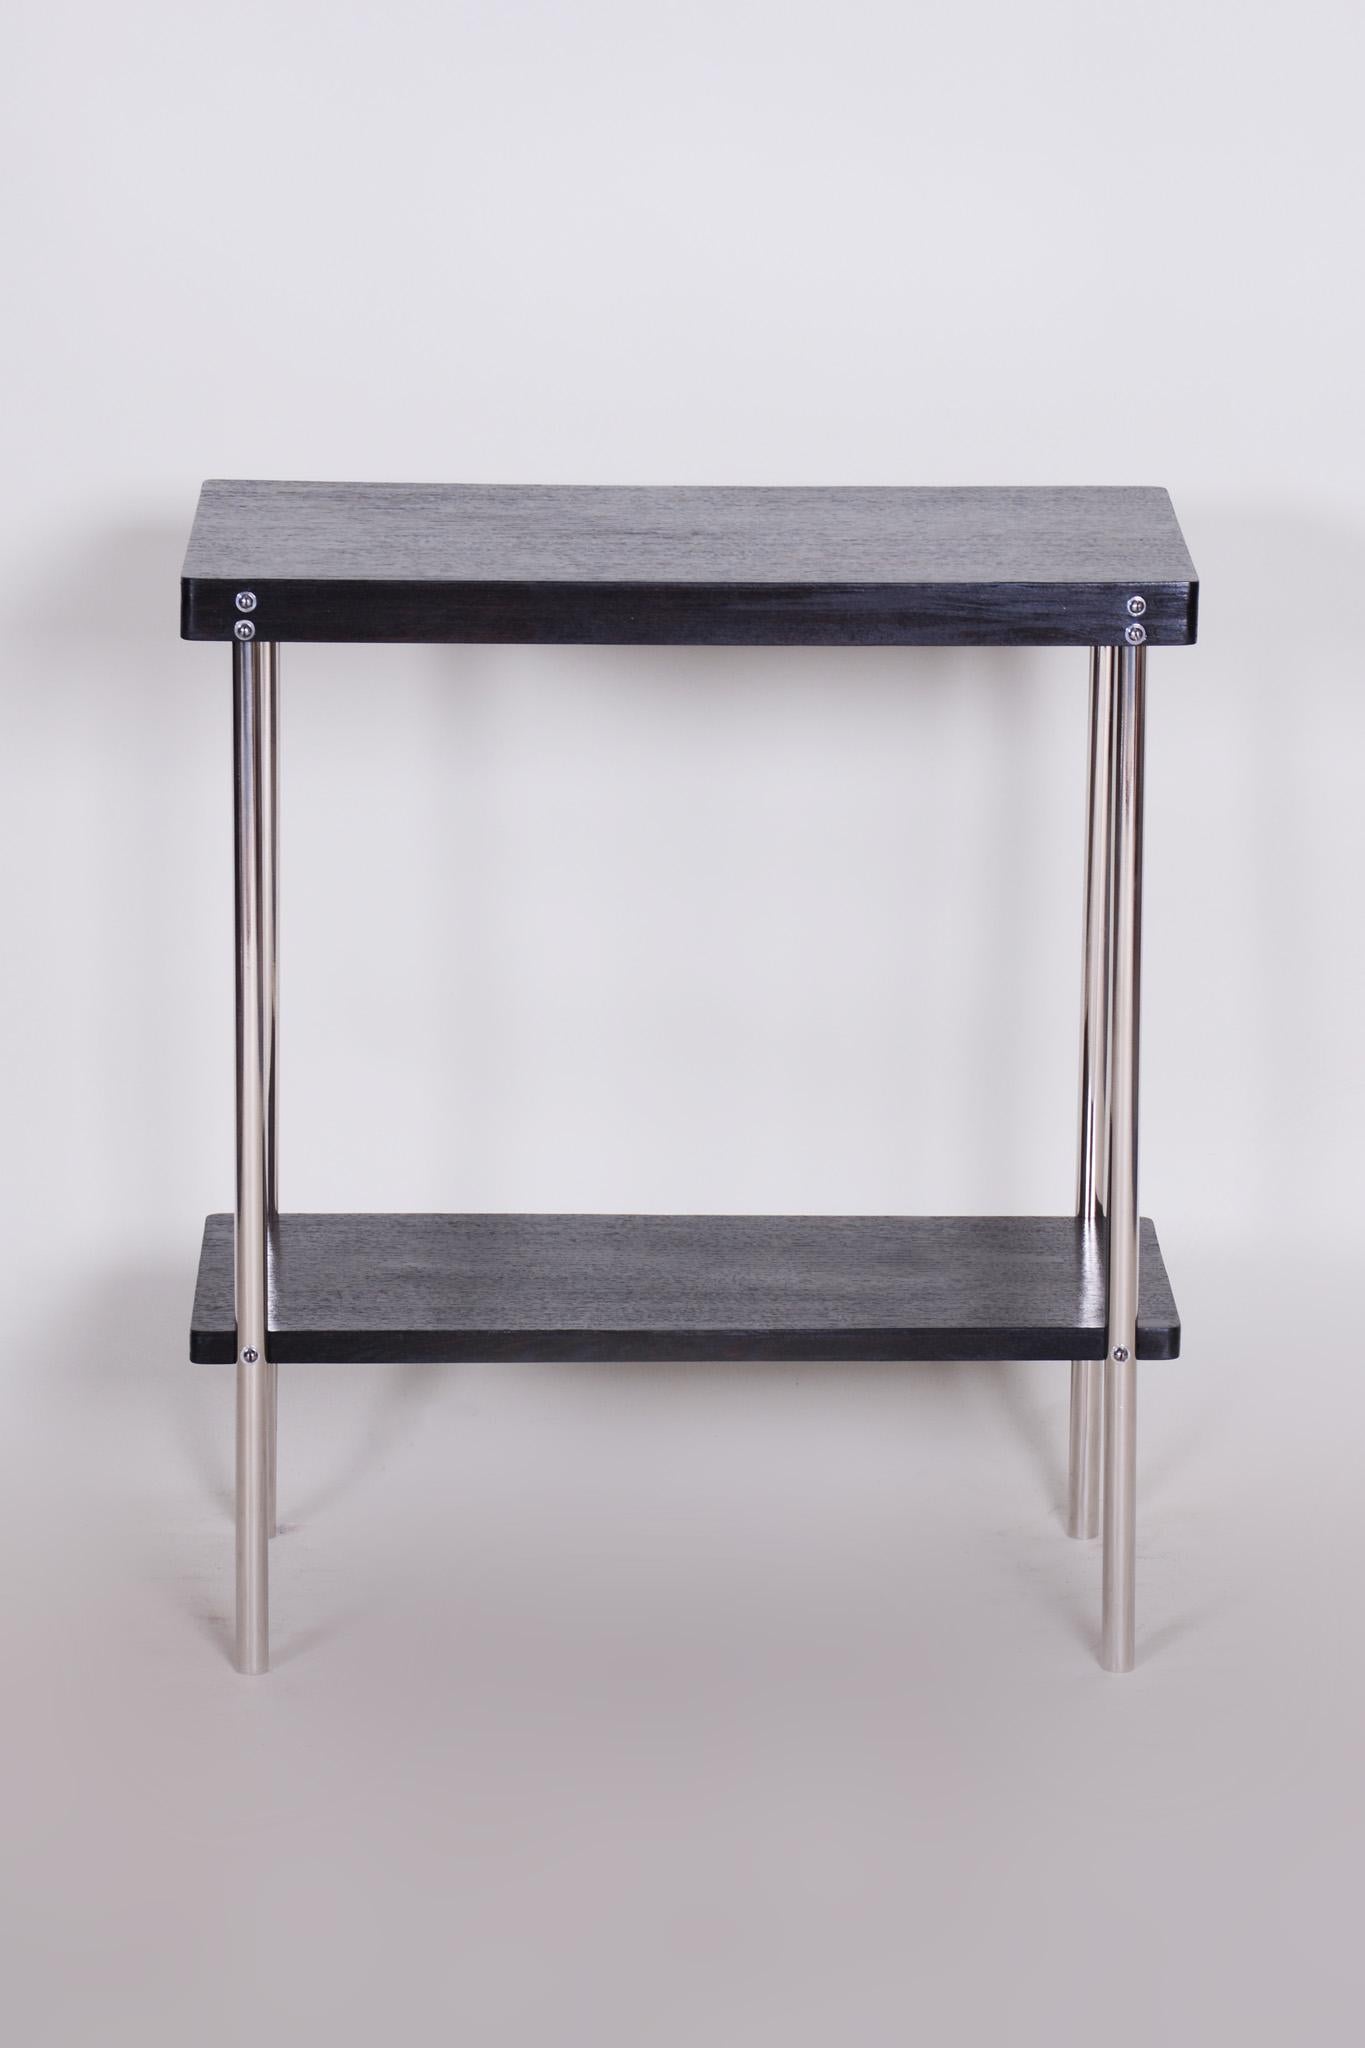 Small Czech chrome Bauhaus table.
Material: Chrome-plated steel and Oak
Period: 1930-1939
Source: Czechia.